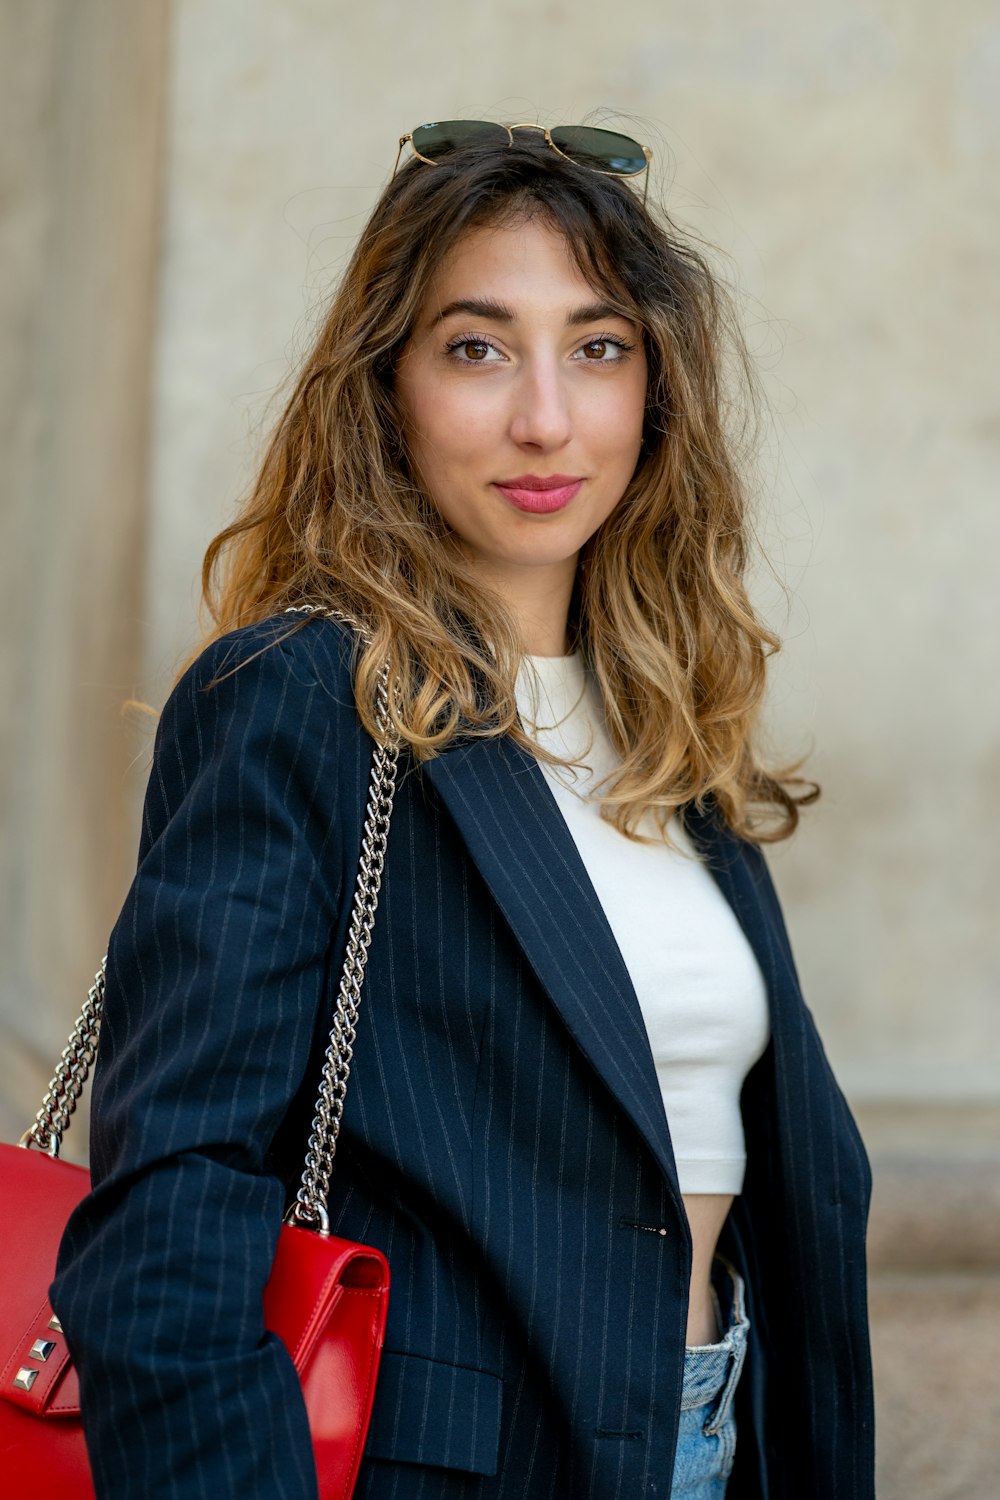 a woman wearing a suit and holding a red purse